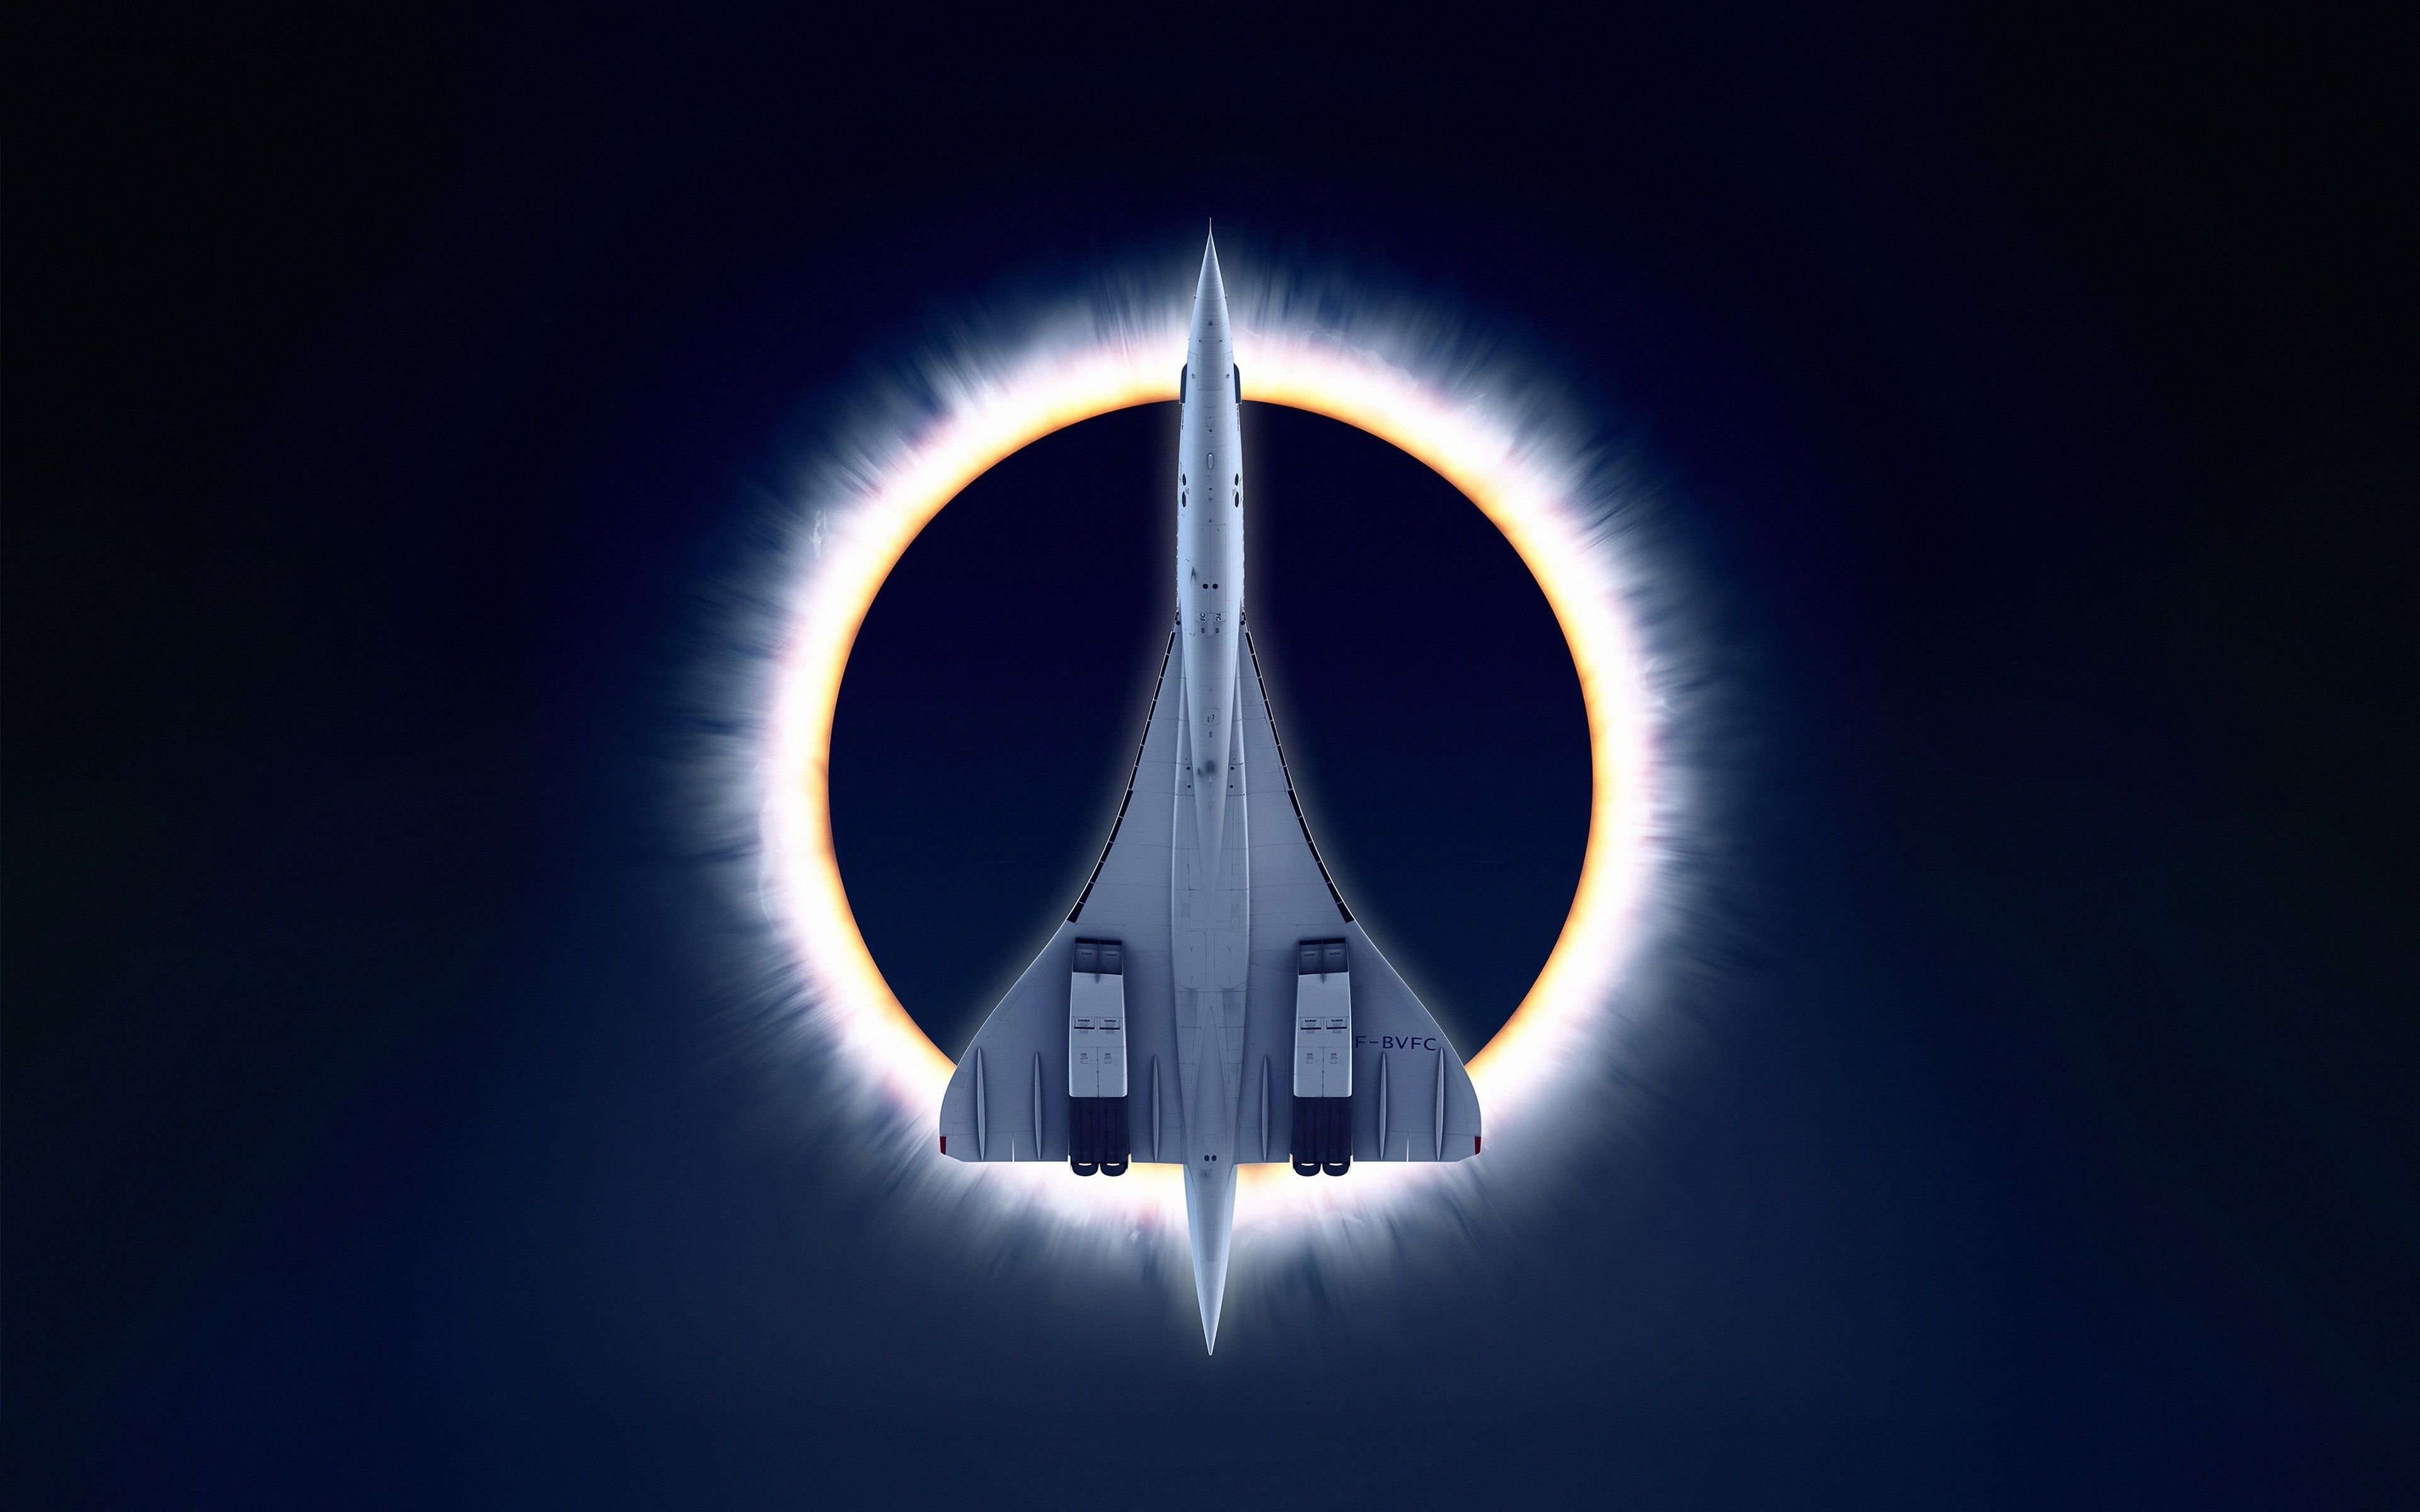 Concorde Carre, eclipse, airplane, moon, aircraft, 3840x2400 wallpaper